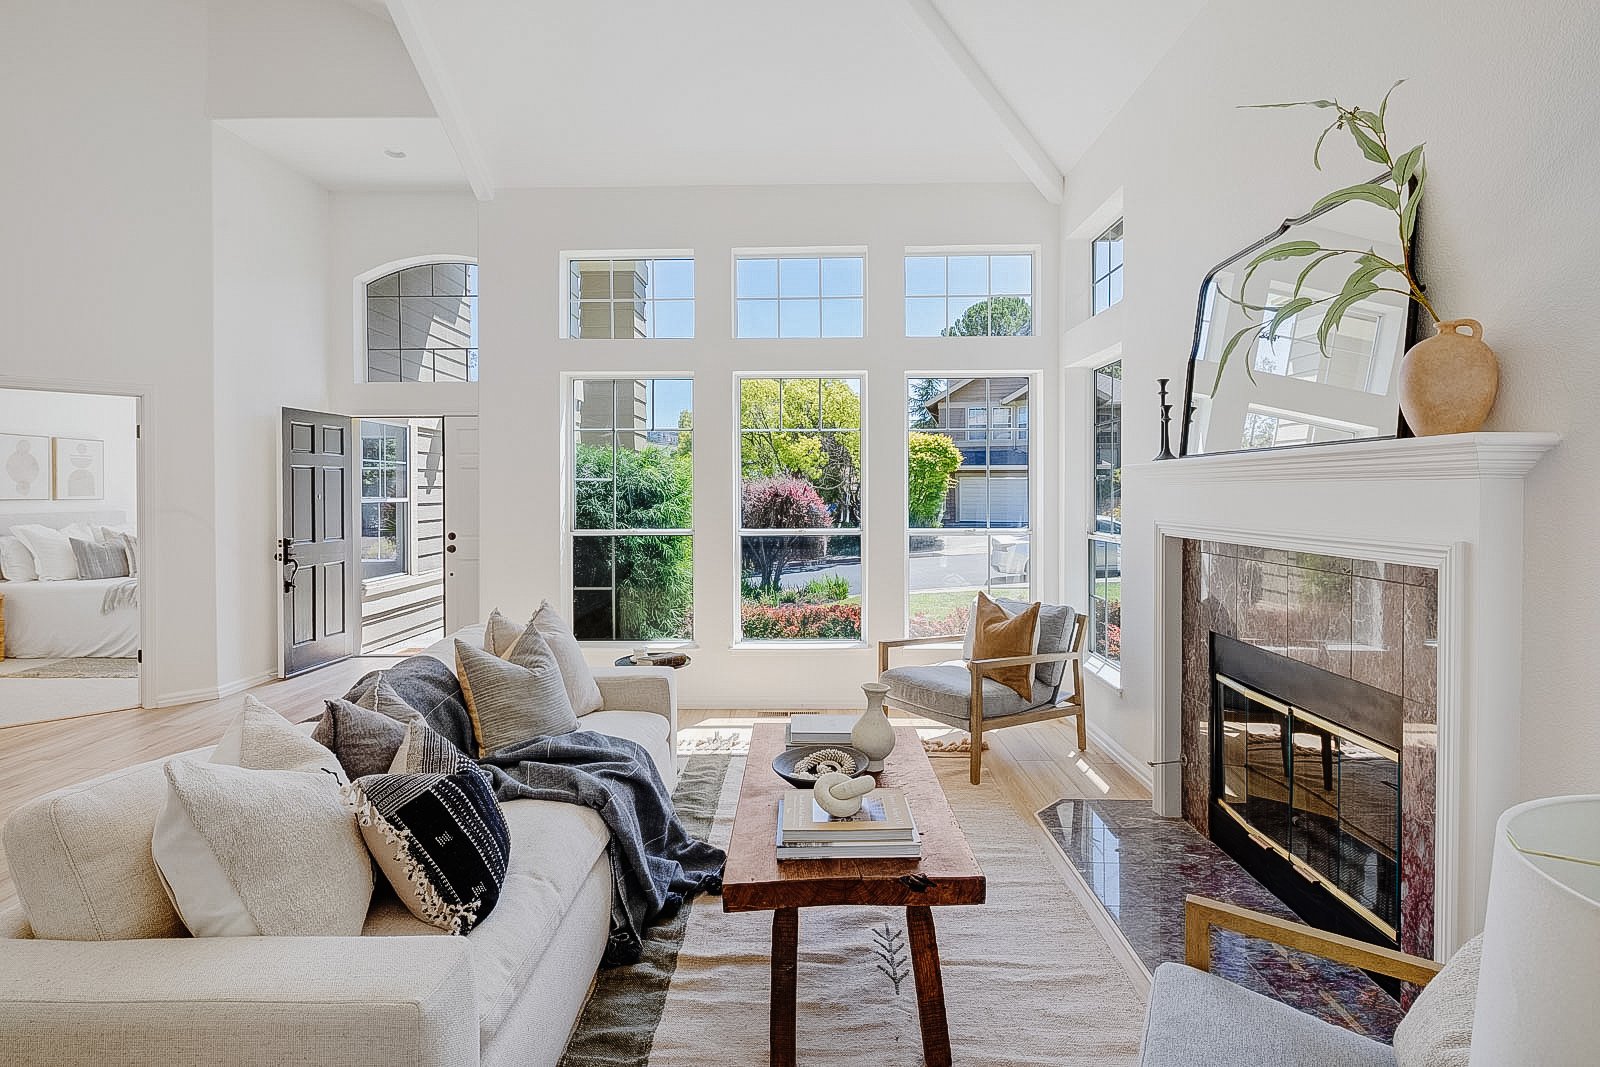 310 Orchid Drive, San Rafael Real Estate for Sale by Whitney Potter at Own Marin-069.jpg